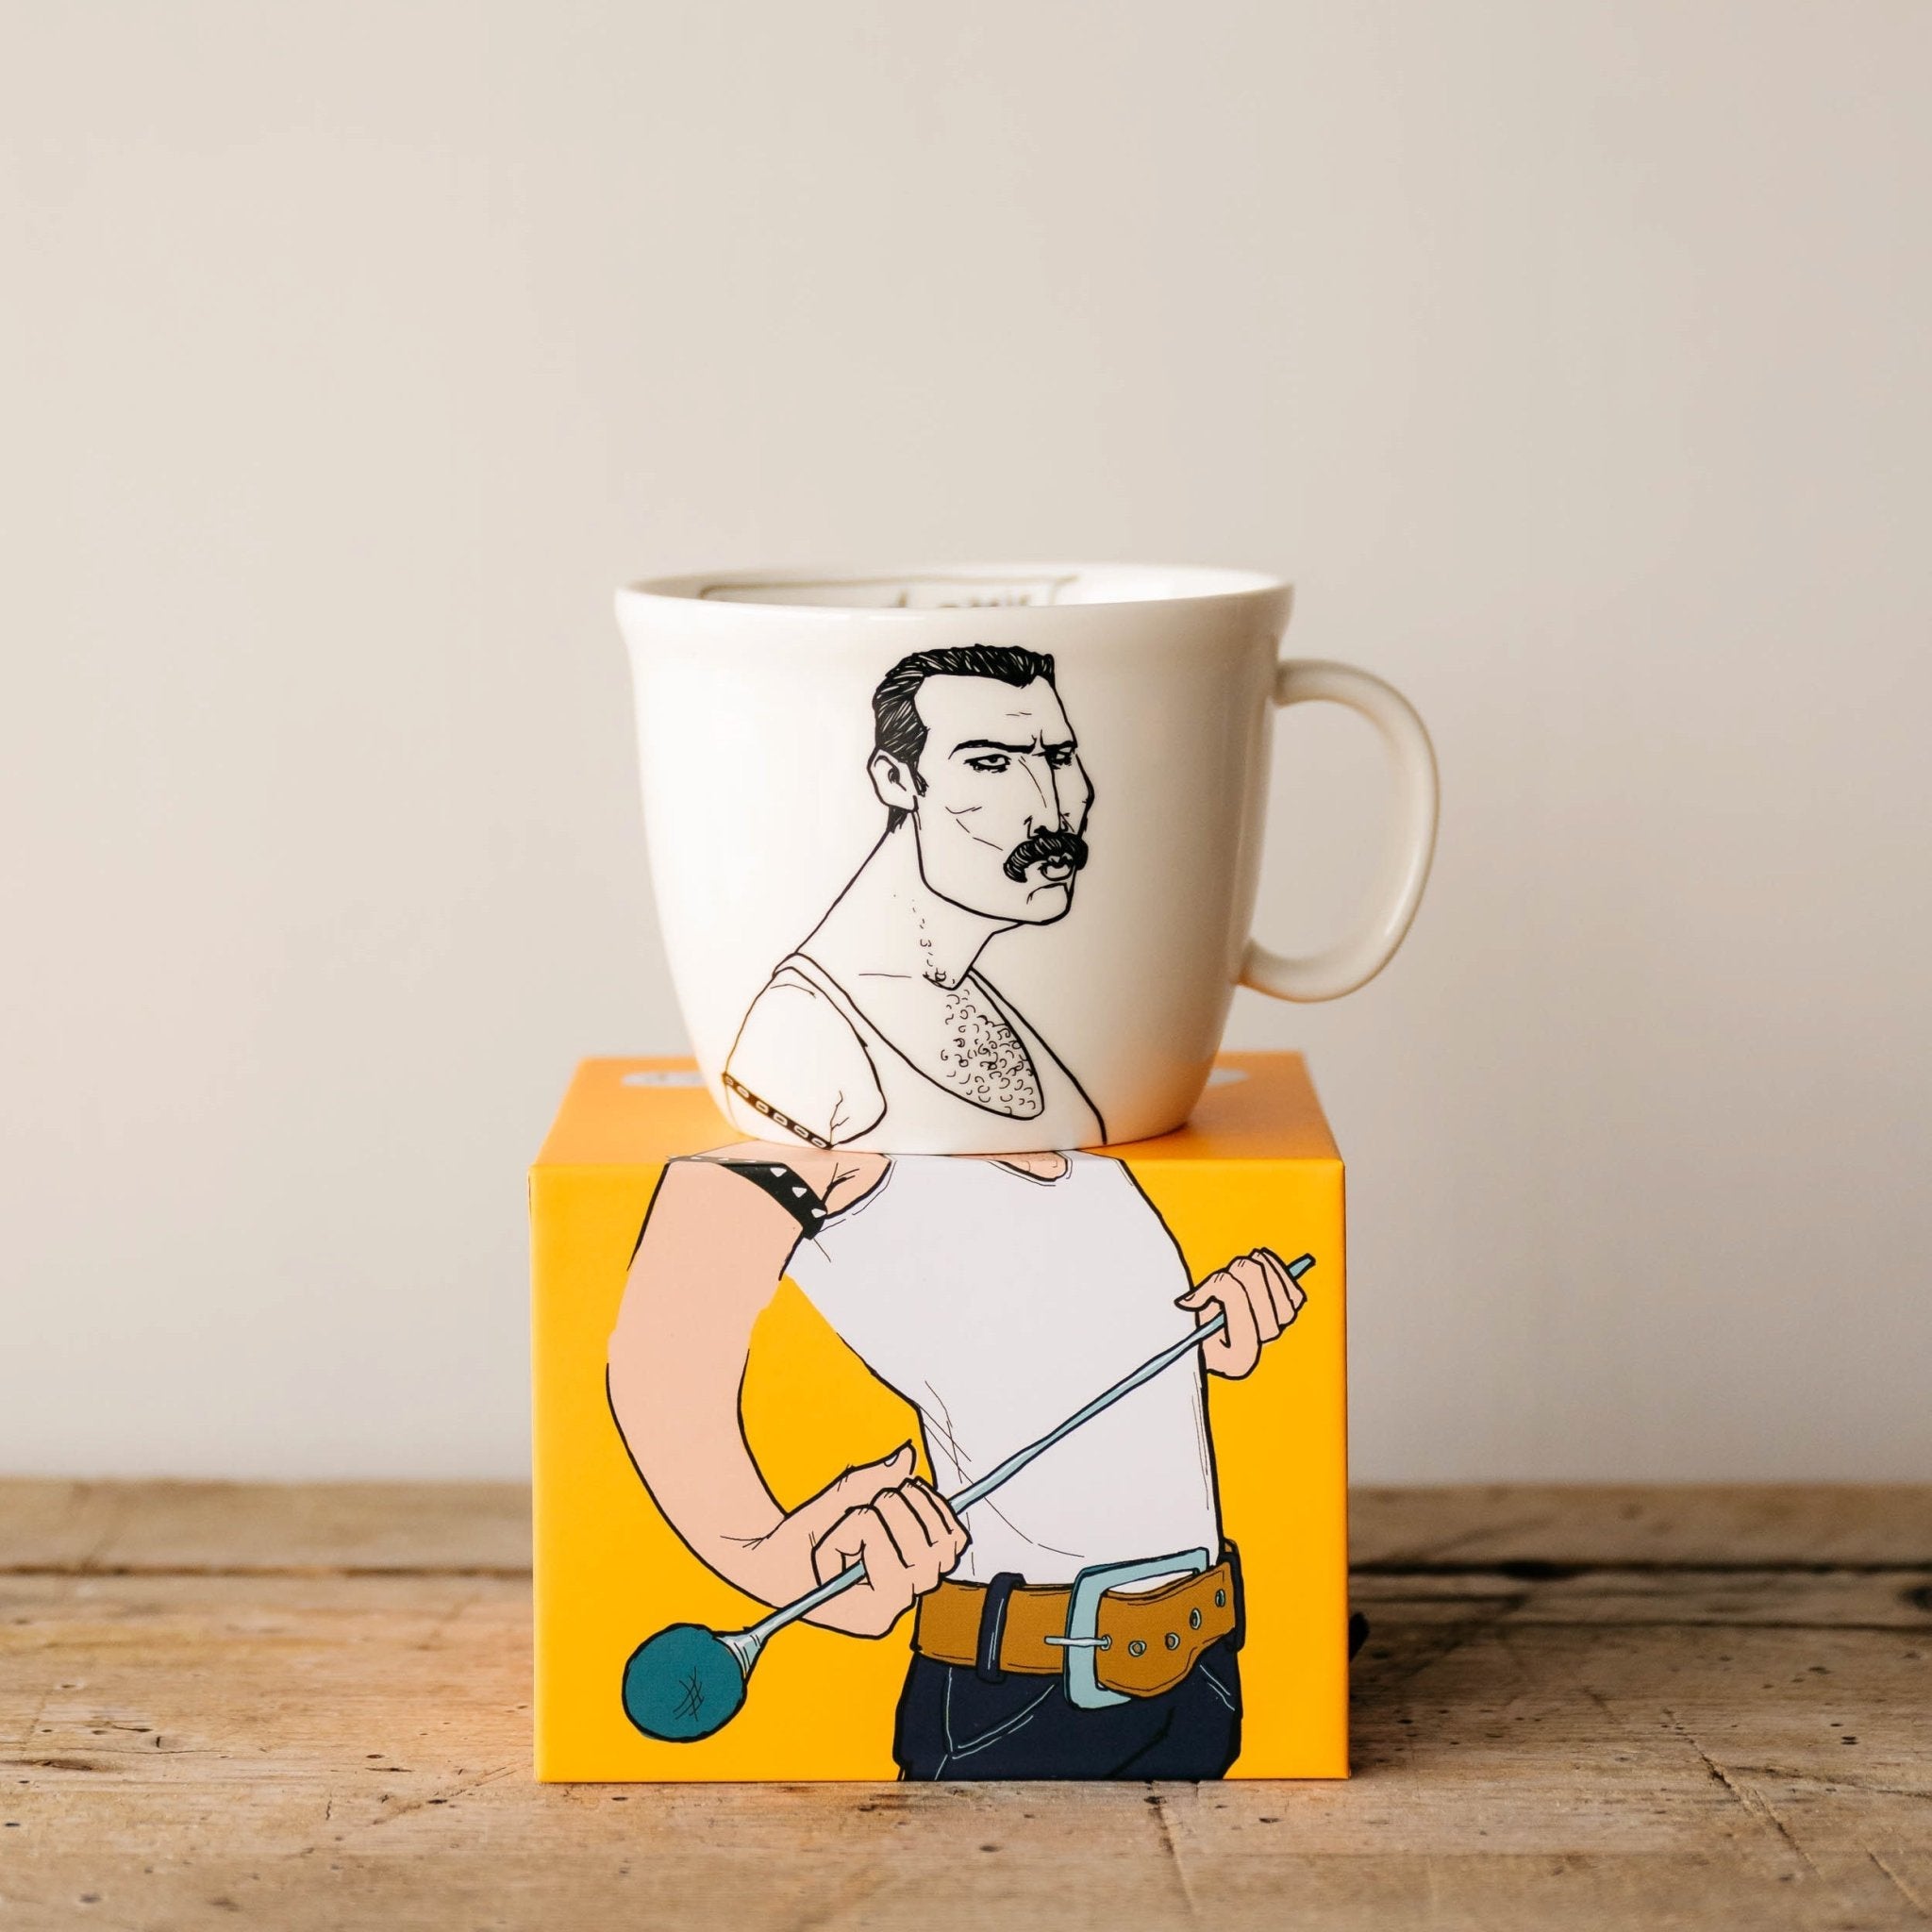 Porcelain cup inspired by Freddie Mercury on the box